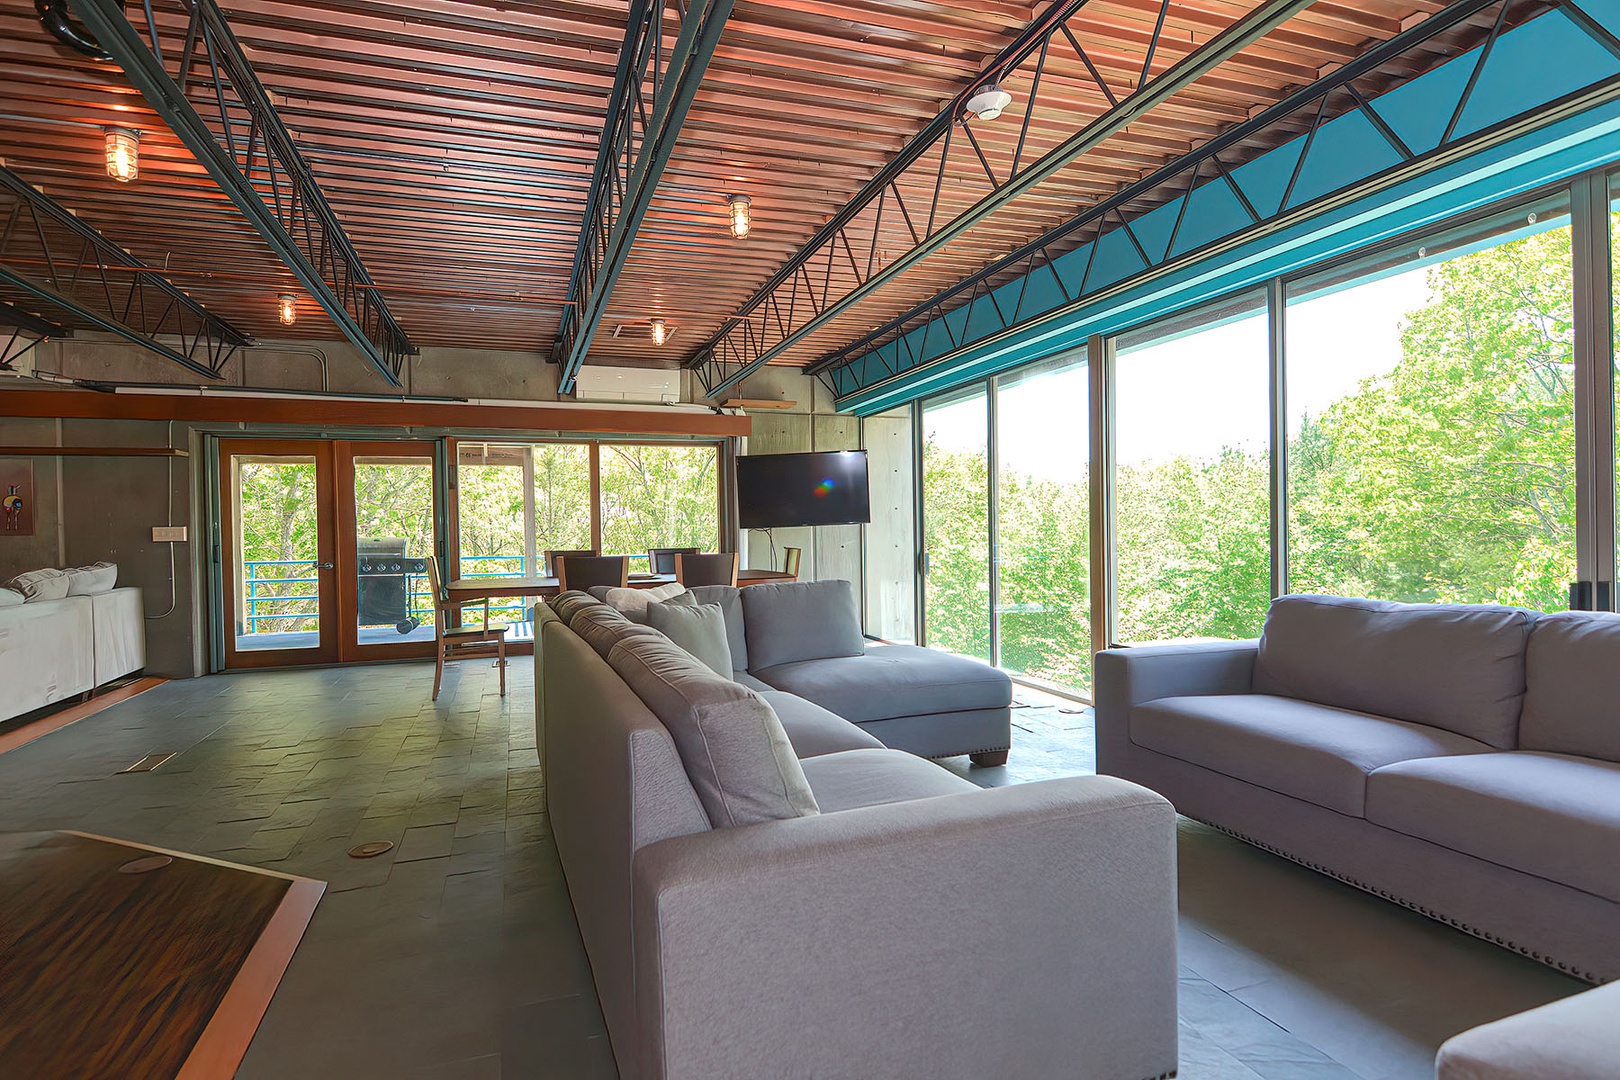 Take in the wooded view from the enormous windows on two sides.